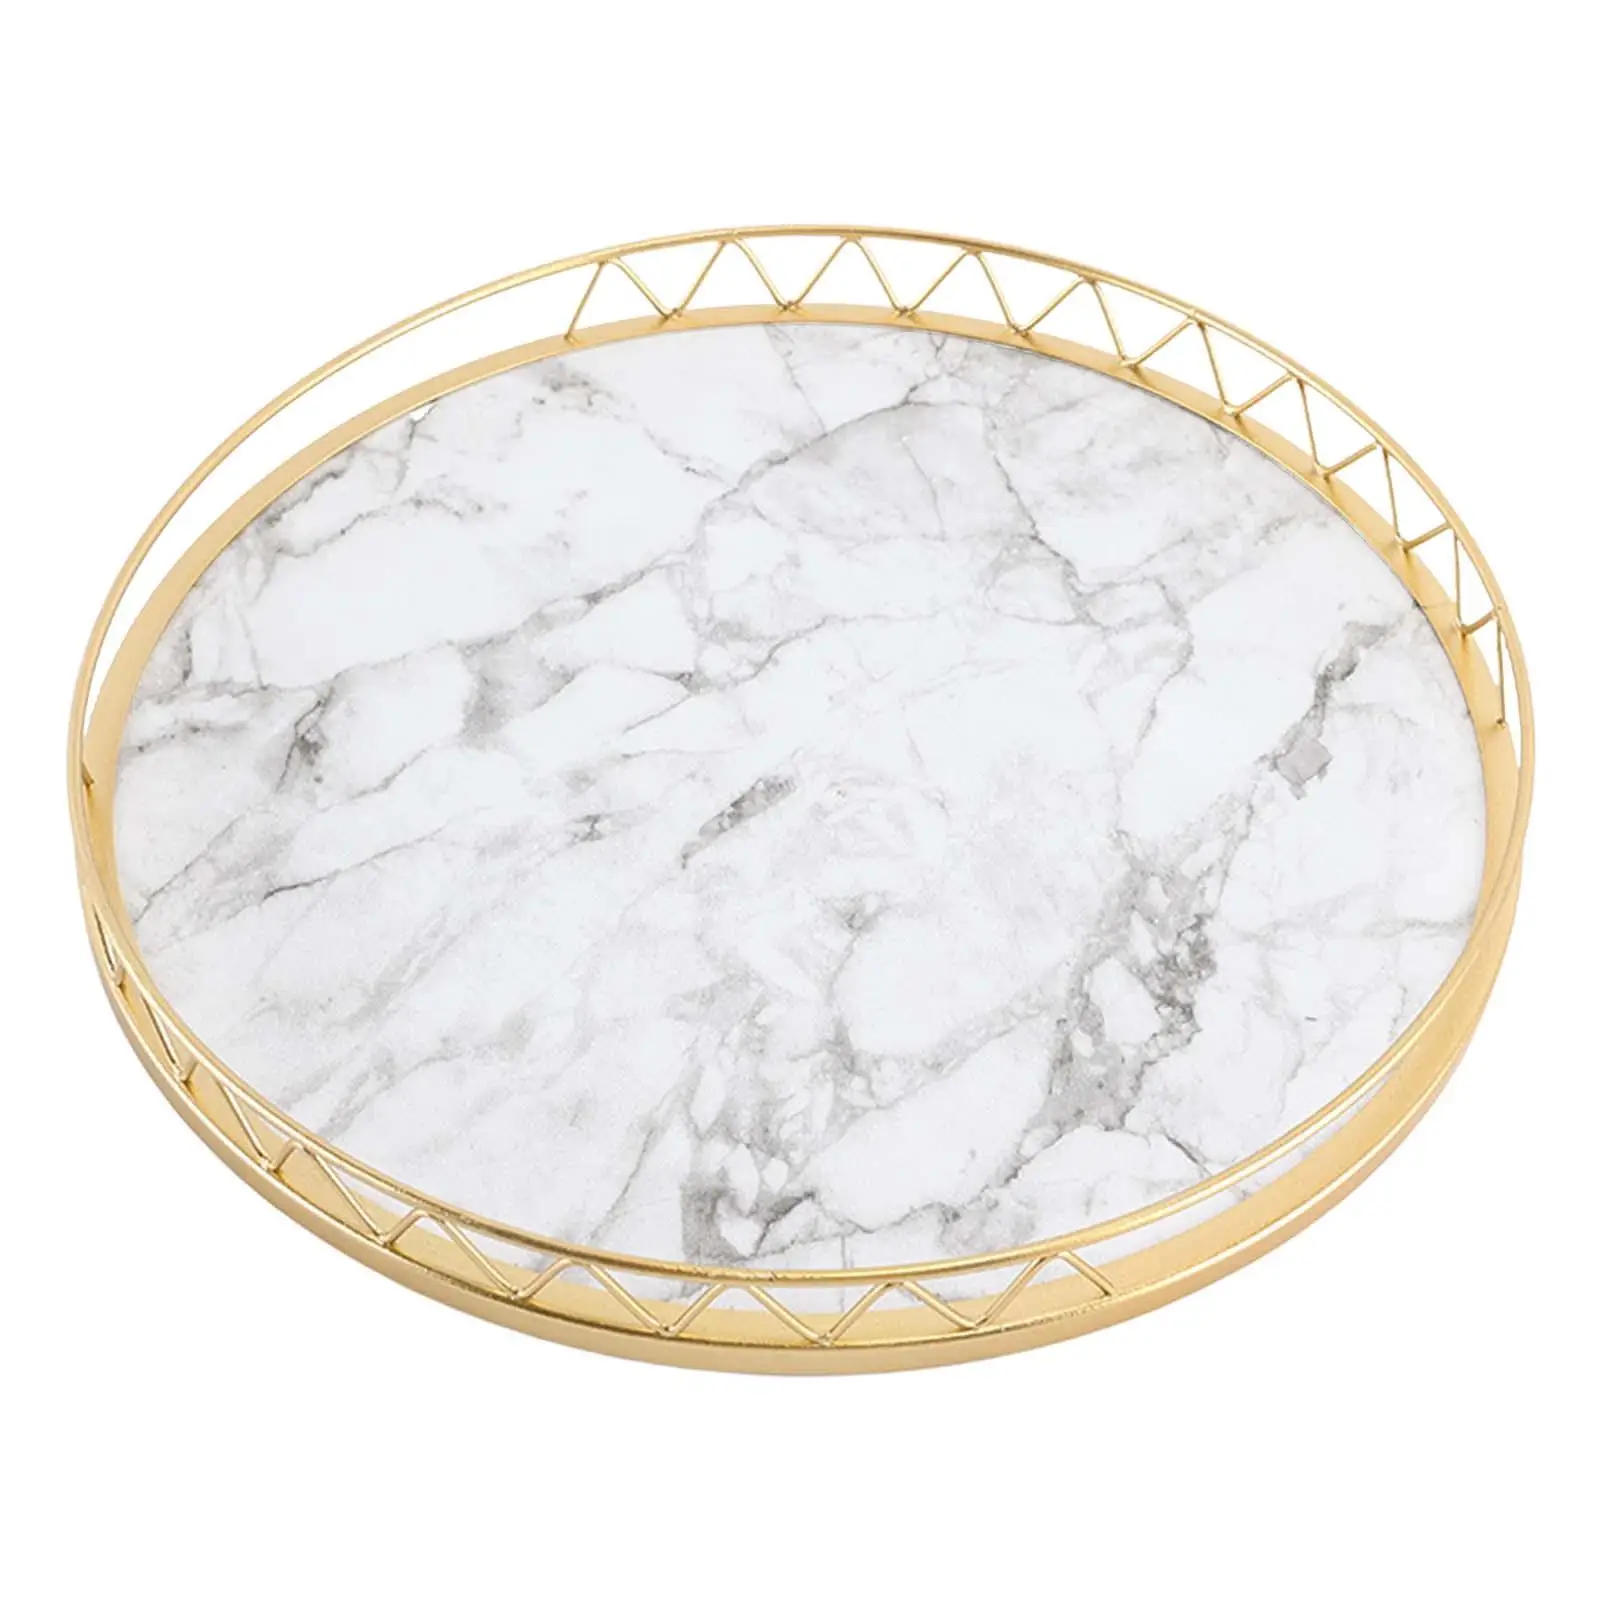 Marble Texture Tray Cupcake Plates Vanity Decorative Tray for Coffee Table